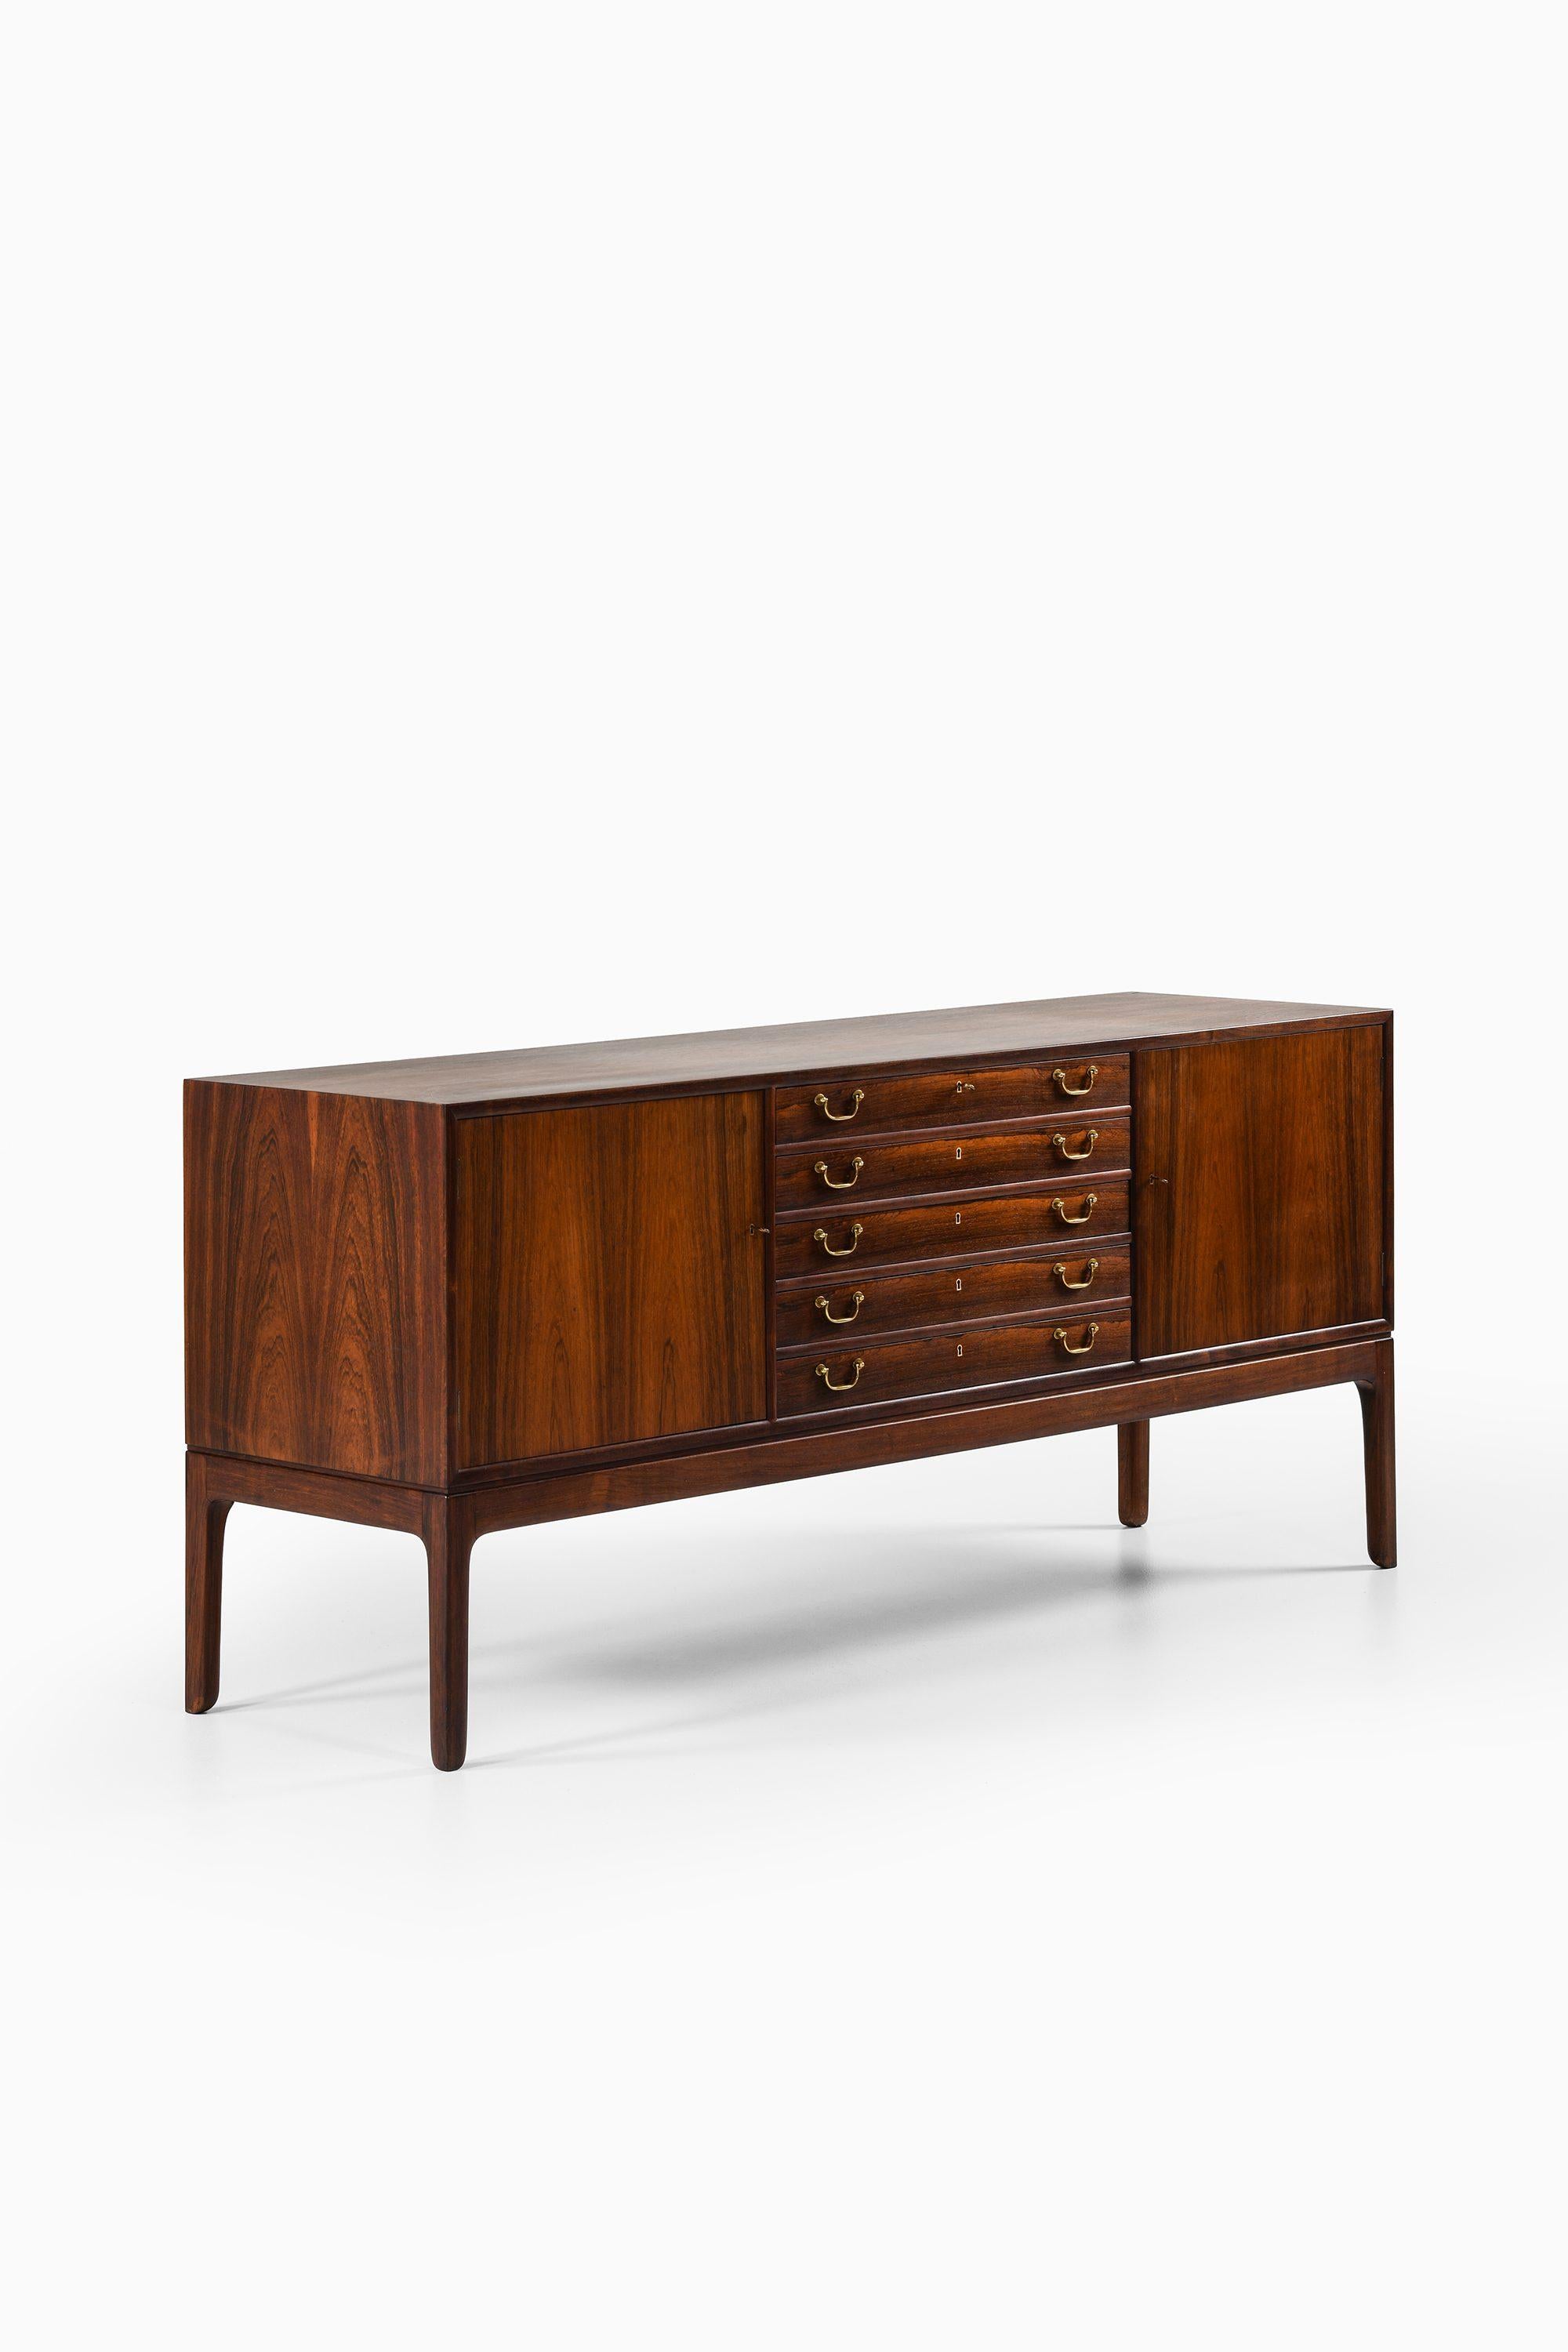 rosewood furniture for sale